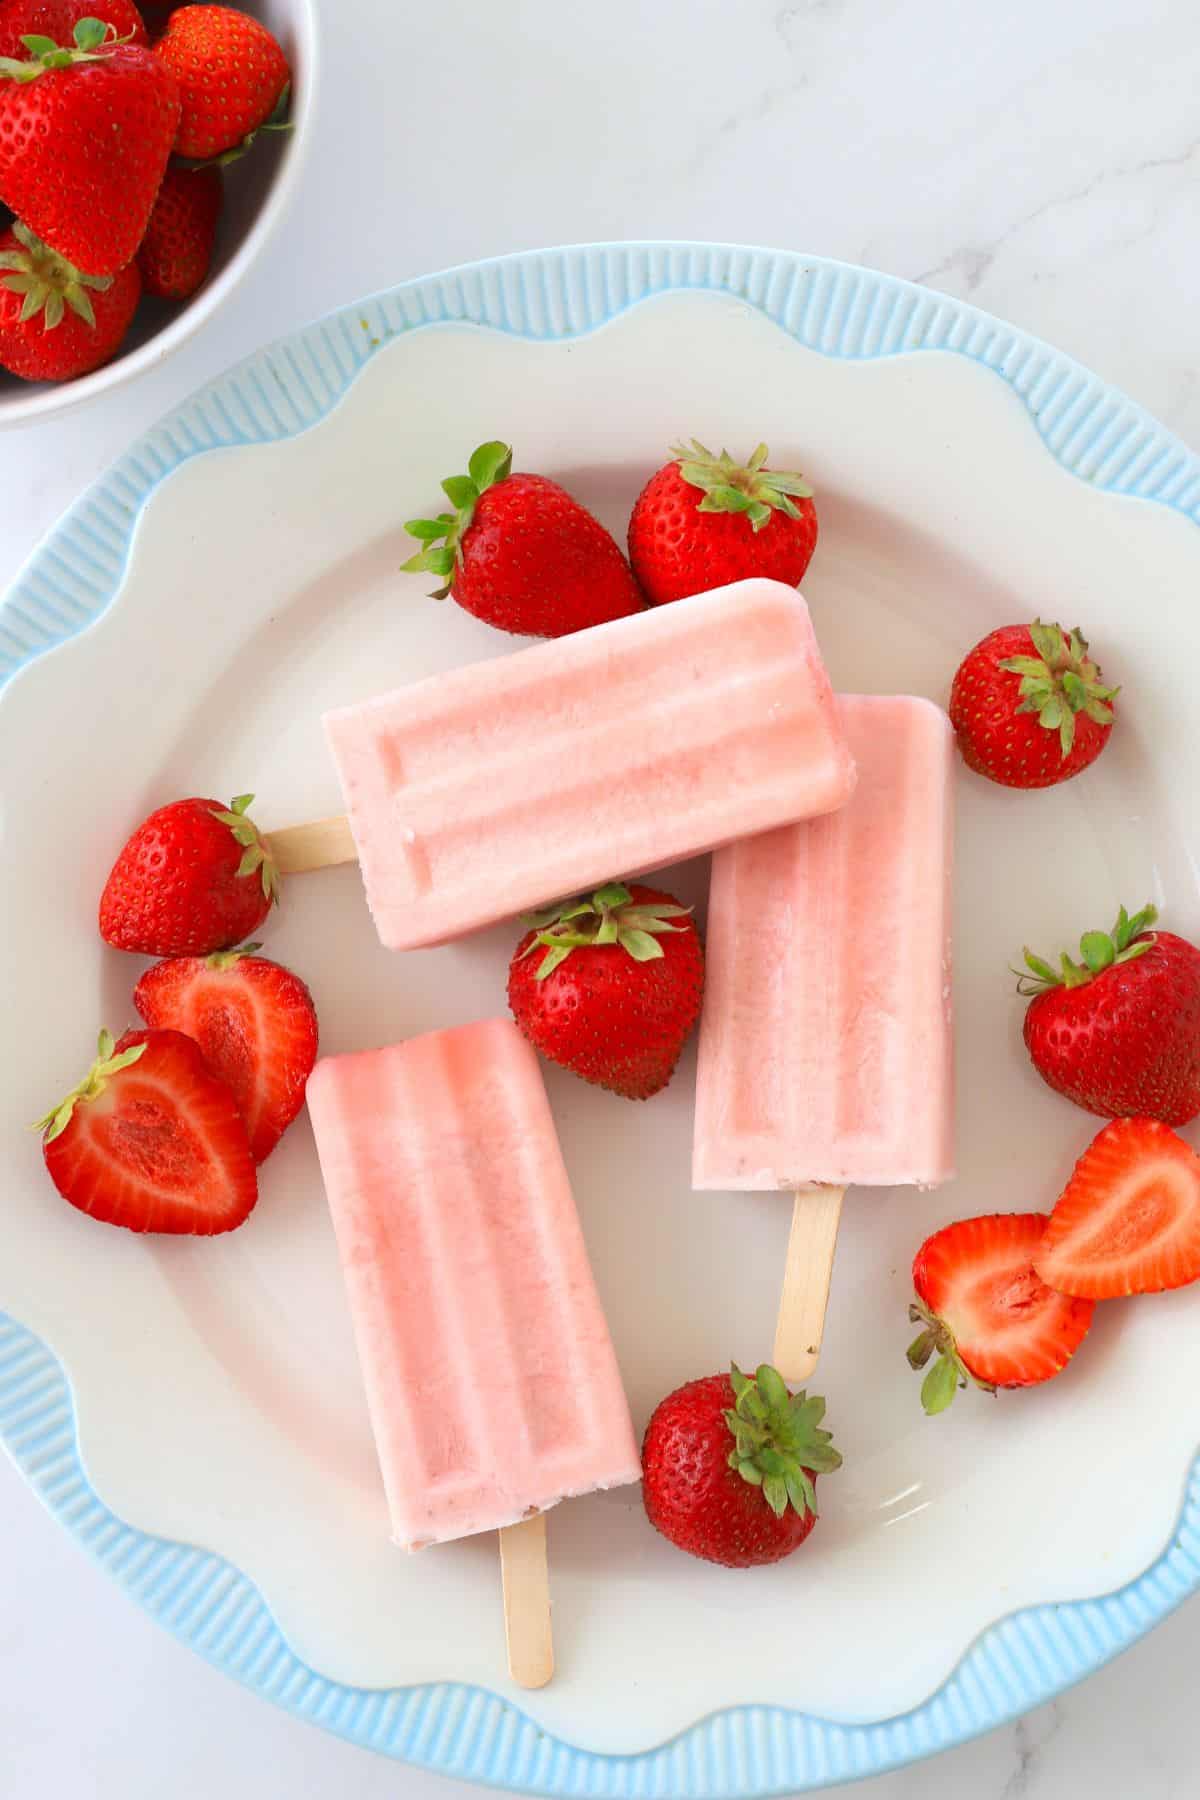 sugar free strawberry ice cream popsicles on a plate with fresh strawberries and a white bowl with fresh strawberries.